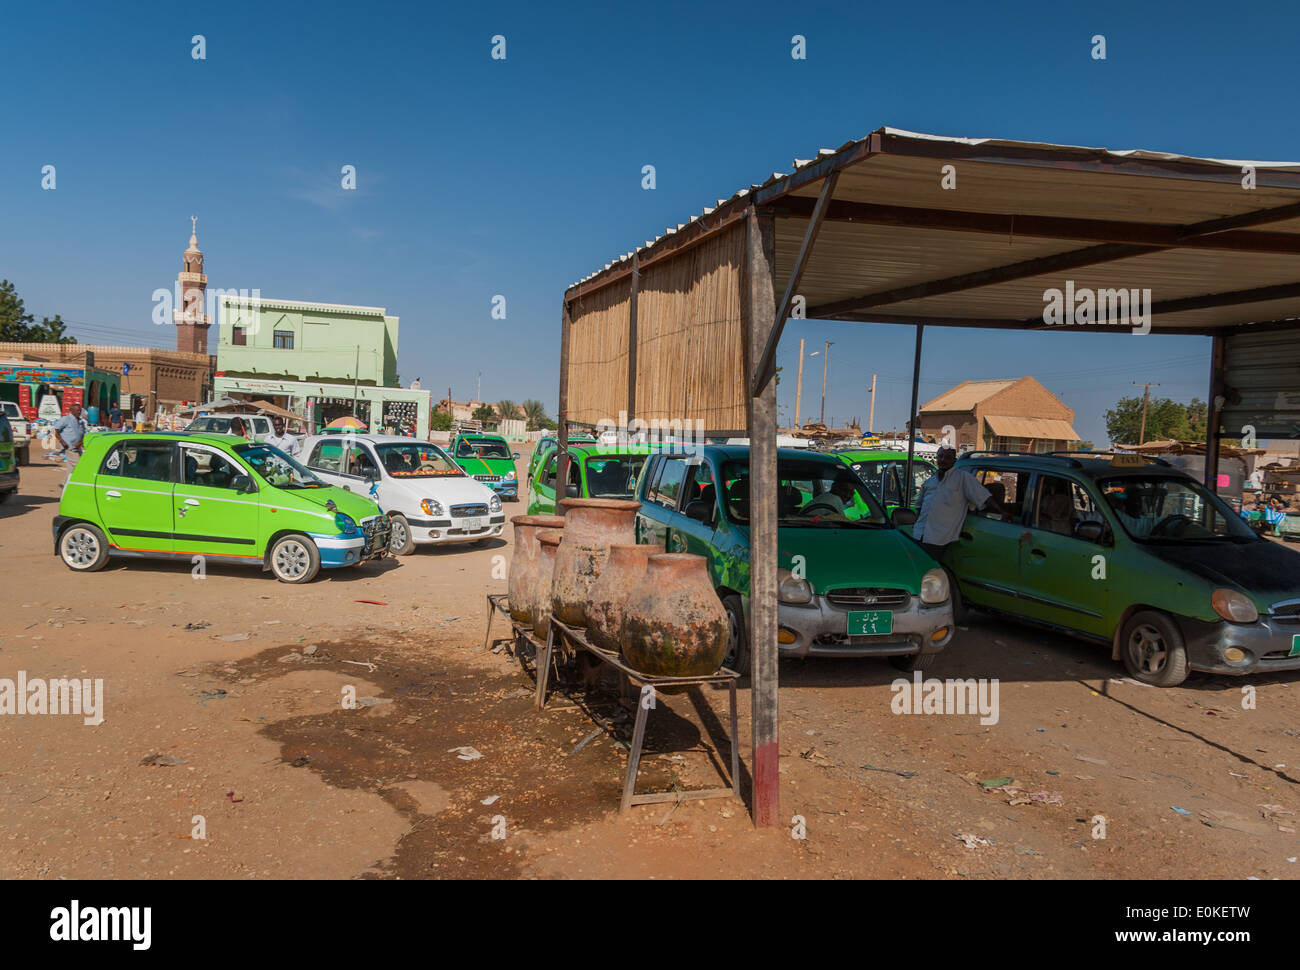 Green Hyundai taxis at filling (gas) station and zeers, (in centre of photograph), Karima, northern Sudan Stock Photo